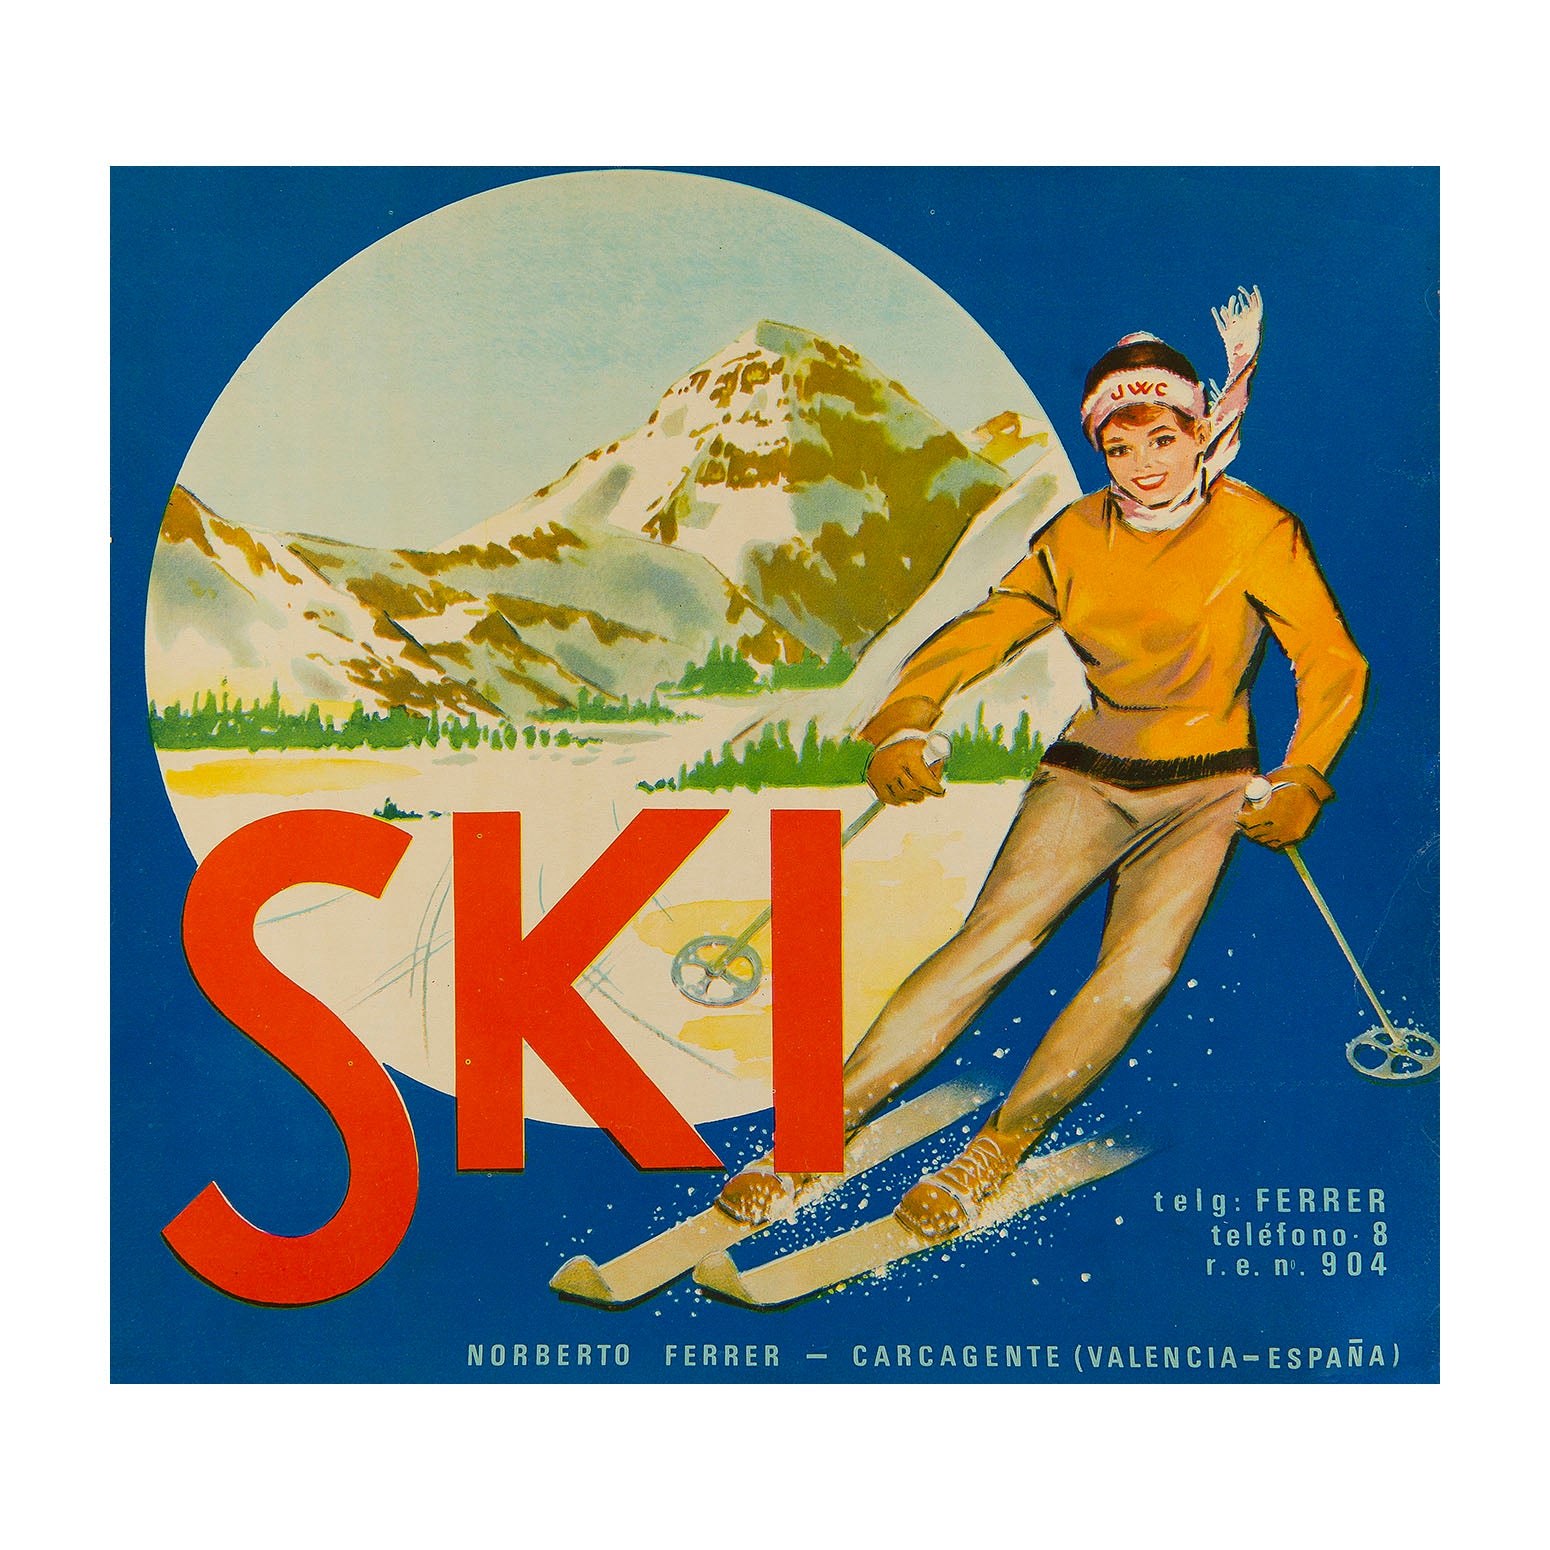 Spanish fruit crate label for Norberto Ferrer - Carcagente Espana, c. 1965. The colourful design depicts a downhill skier with a mountainous landscape in the background.